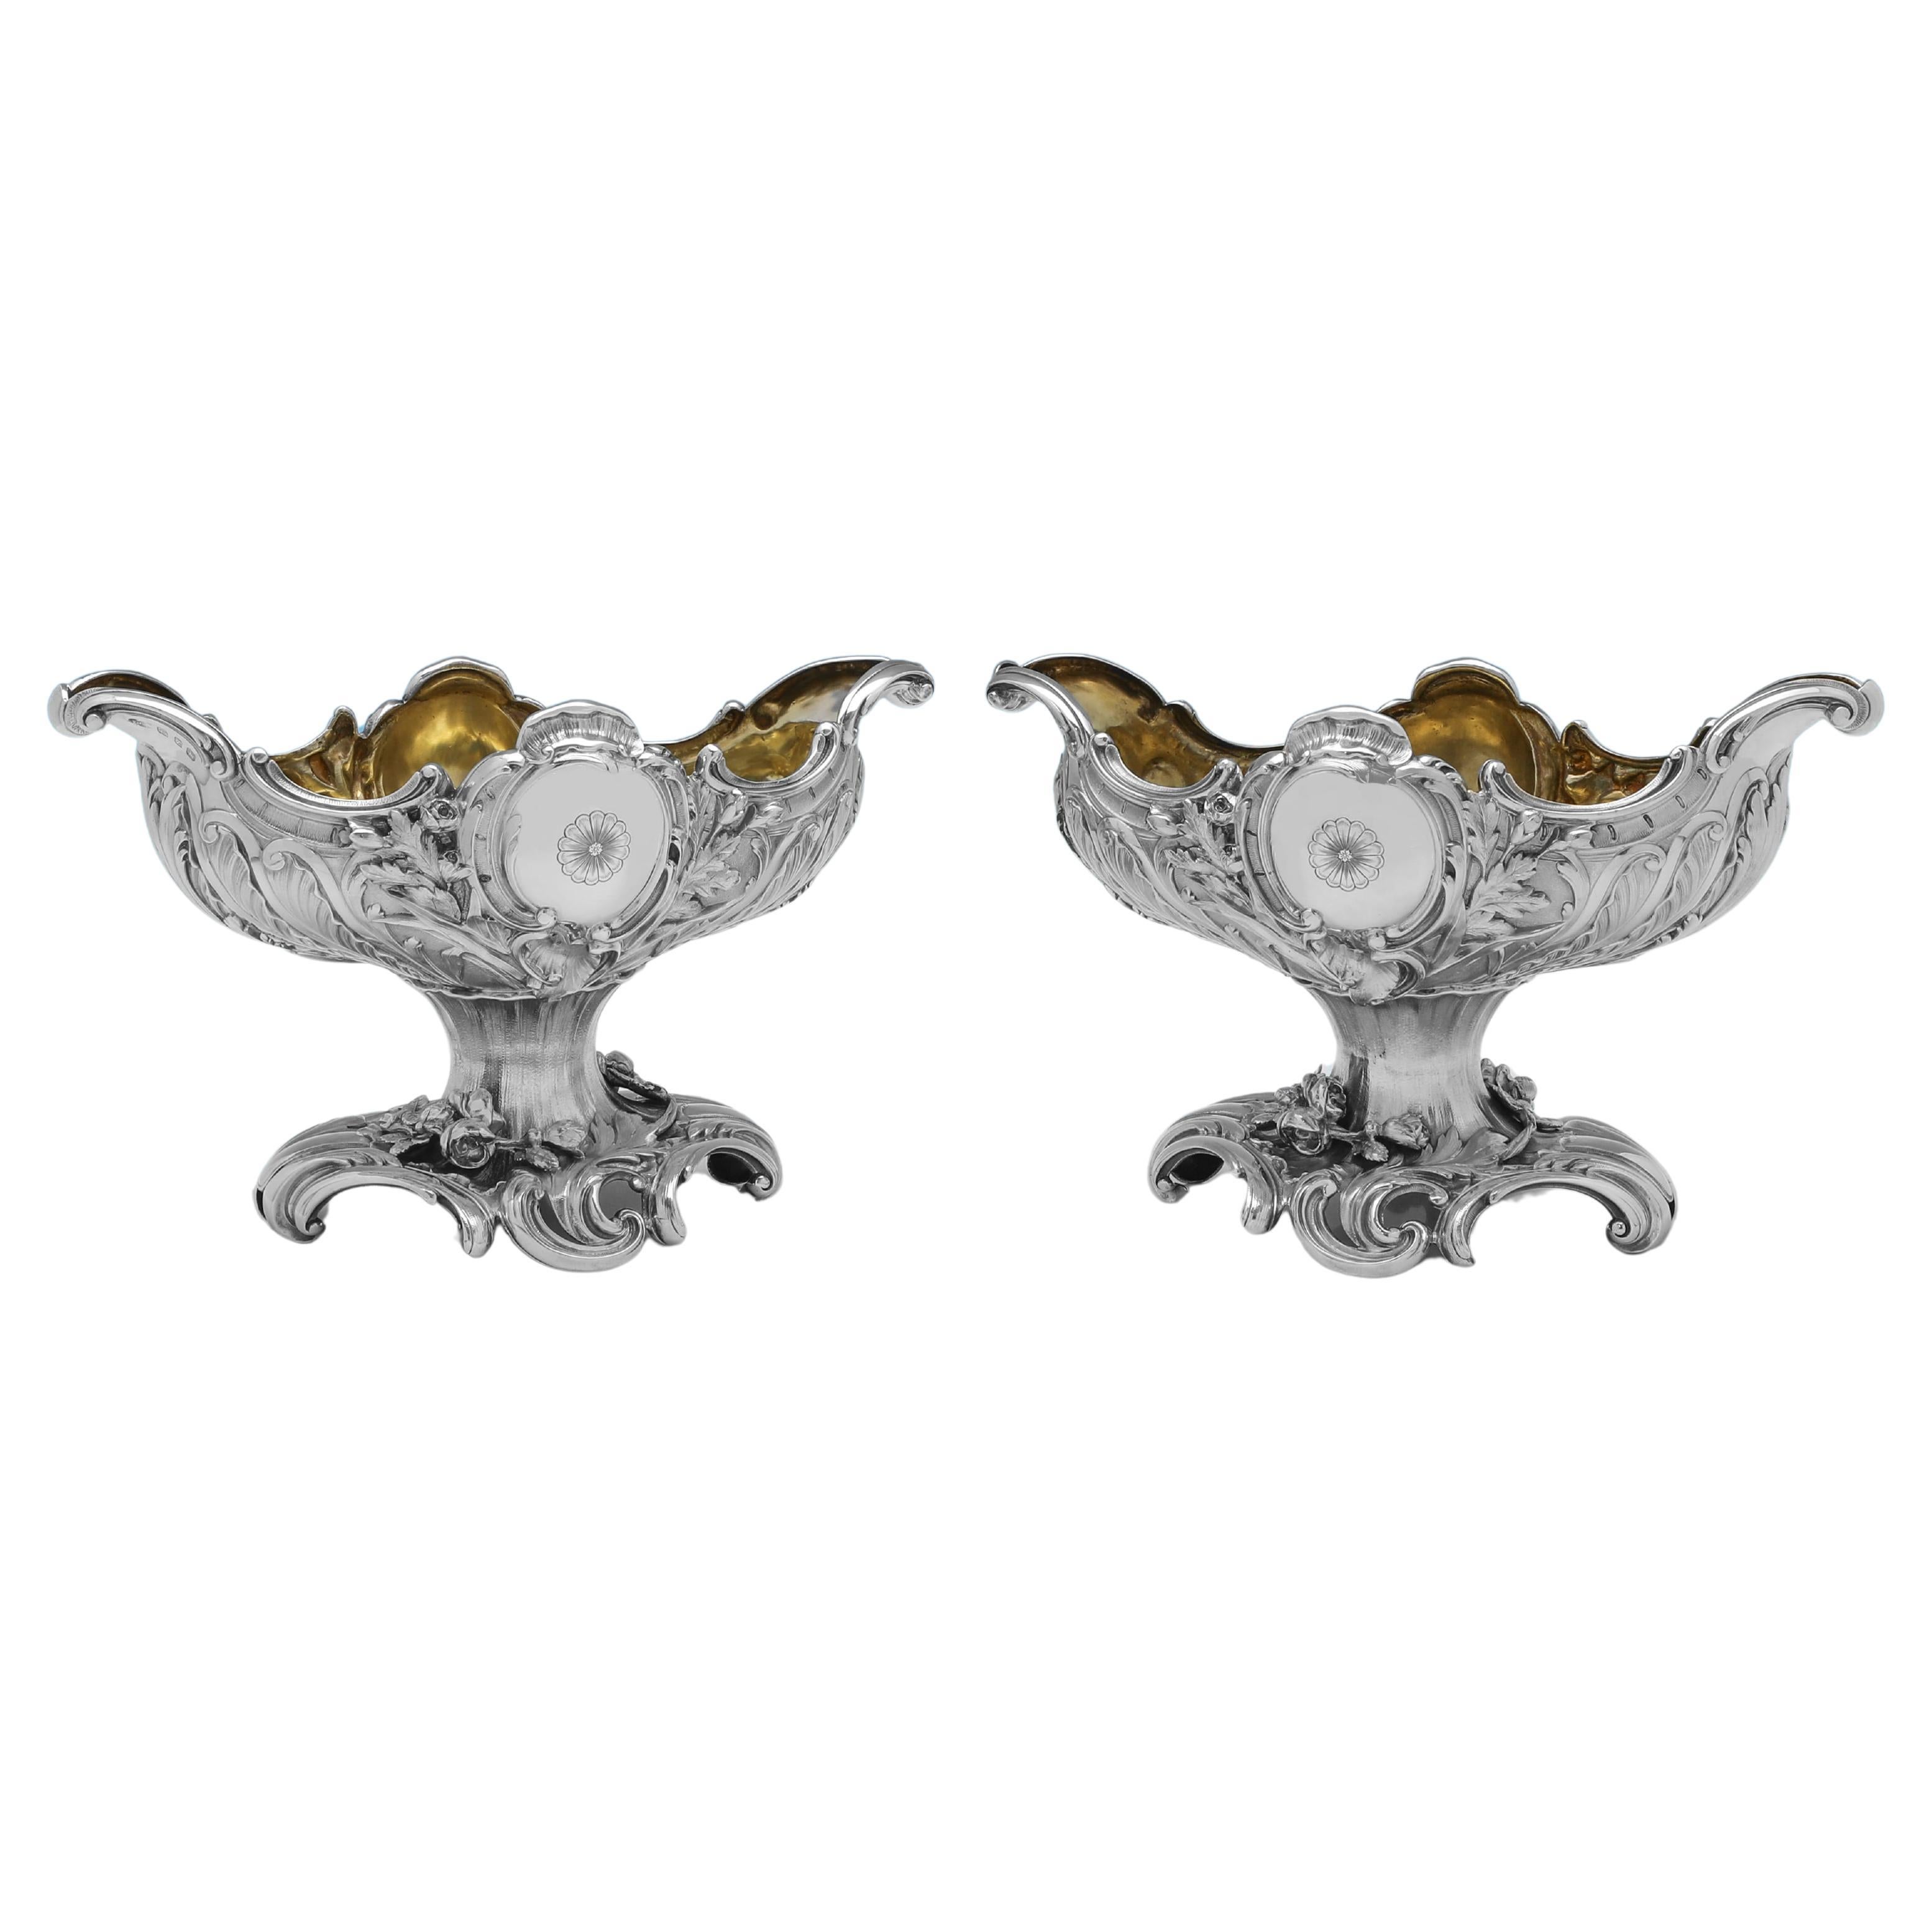 Stunning & heavy pair of Victorian silver bowls by Elkington& Co. 1898 